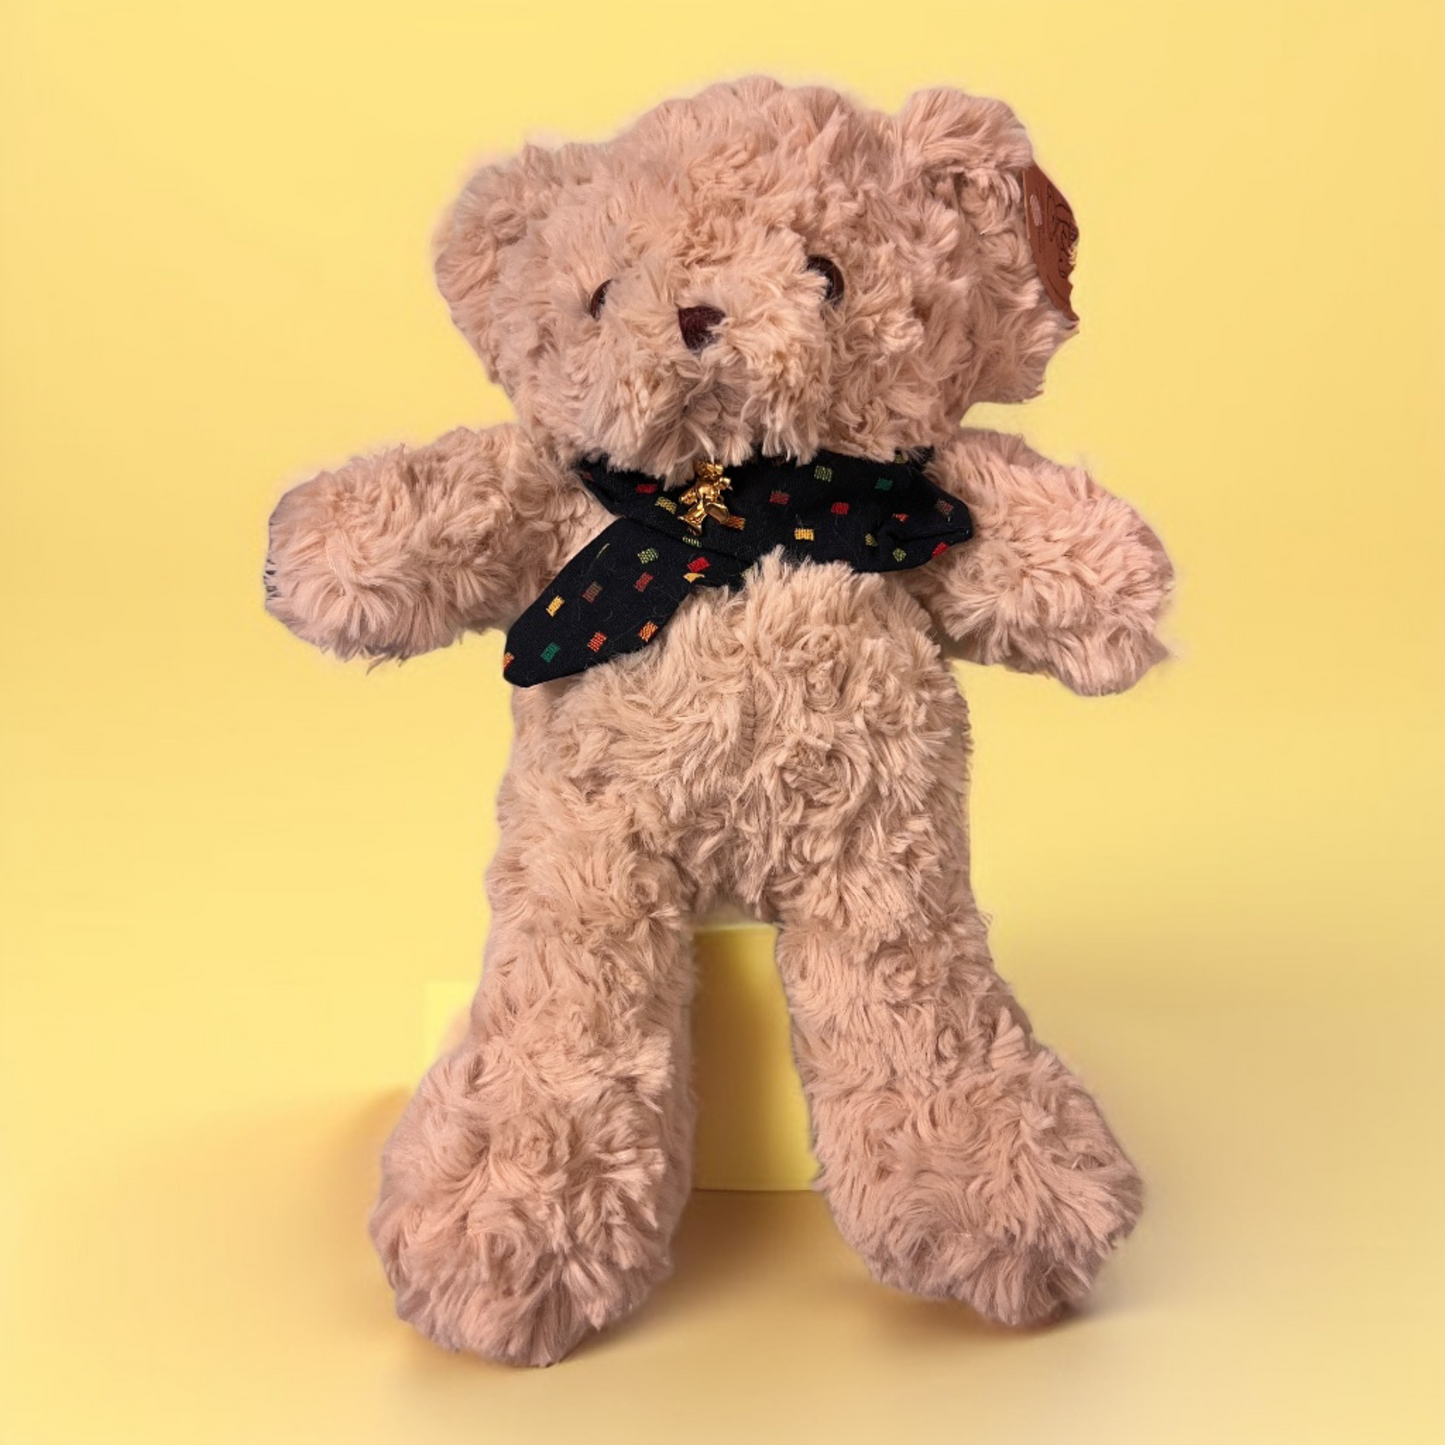 One Up Biscuit Soft Teddy Bear Toy (30cm)